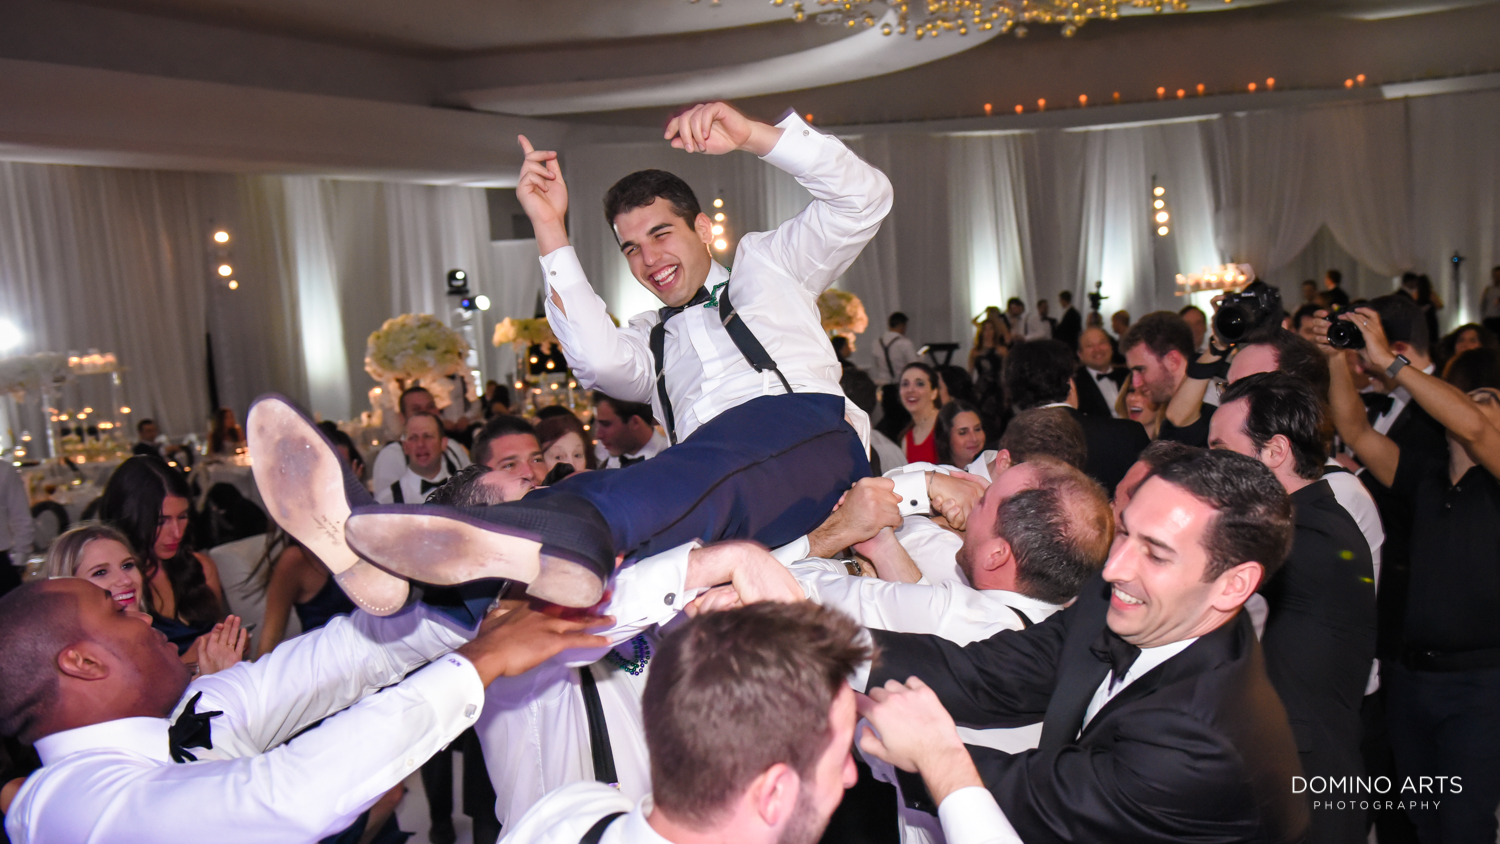 Fun crazy party pictures at fontainebleau miami wedding groom crowd surfing